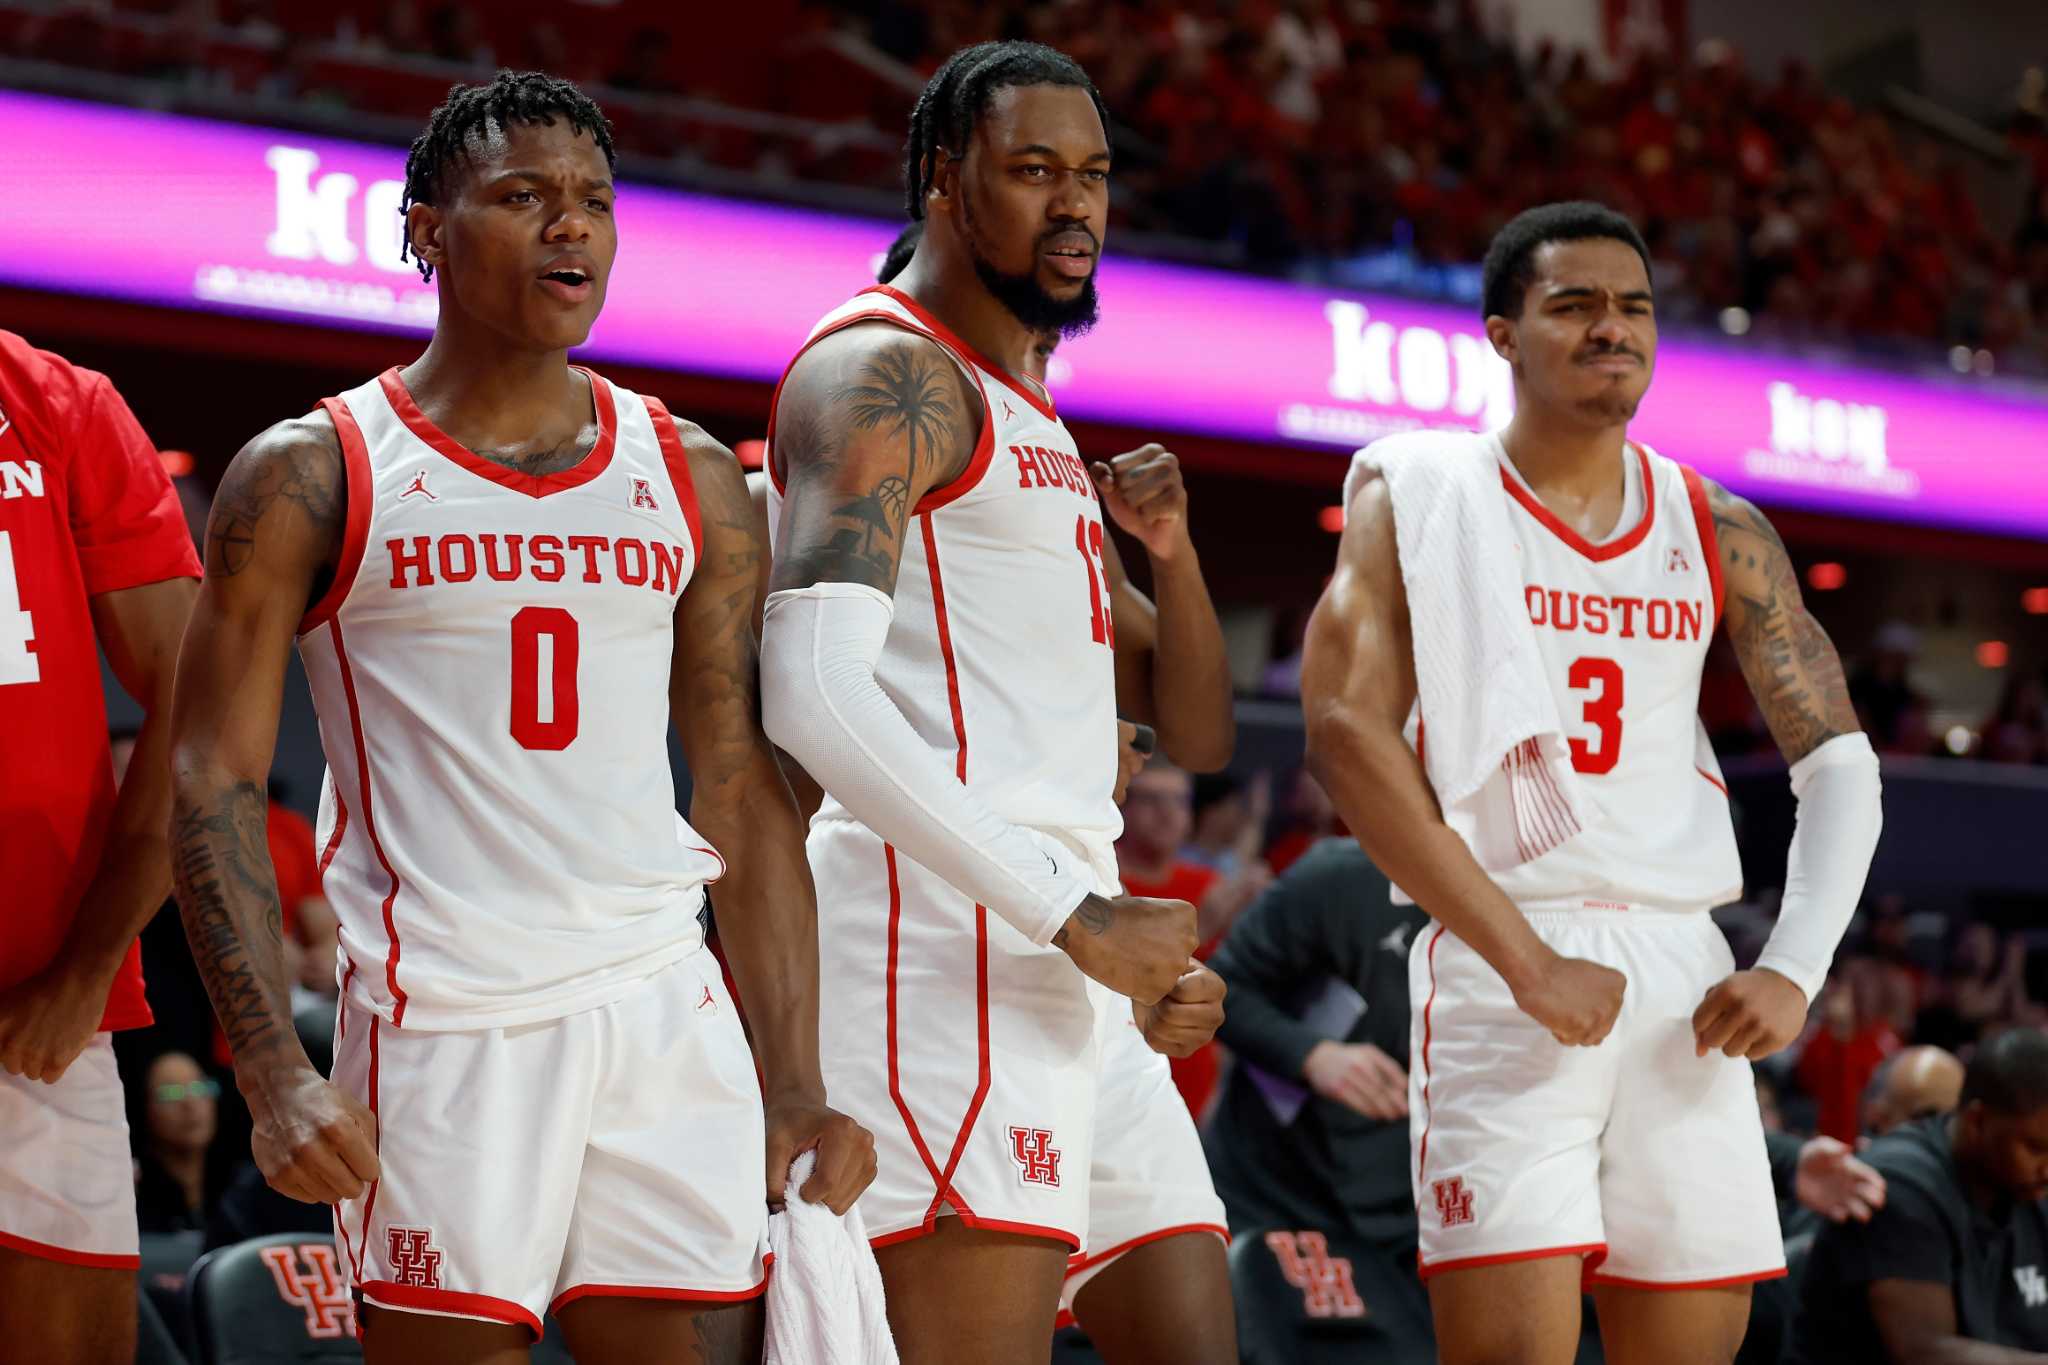 University of Houston Basketball ranked No. 1 in AP poll